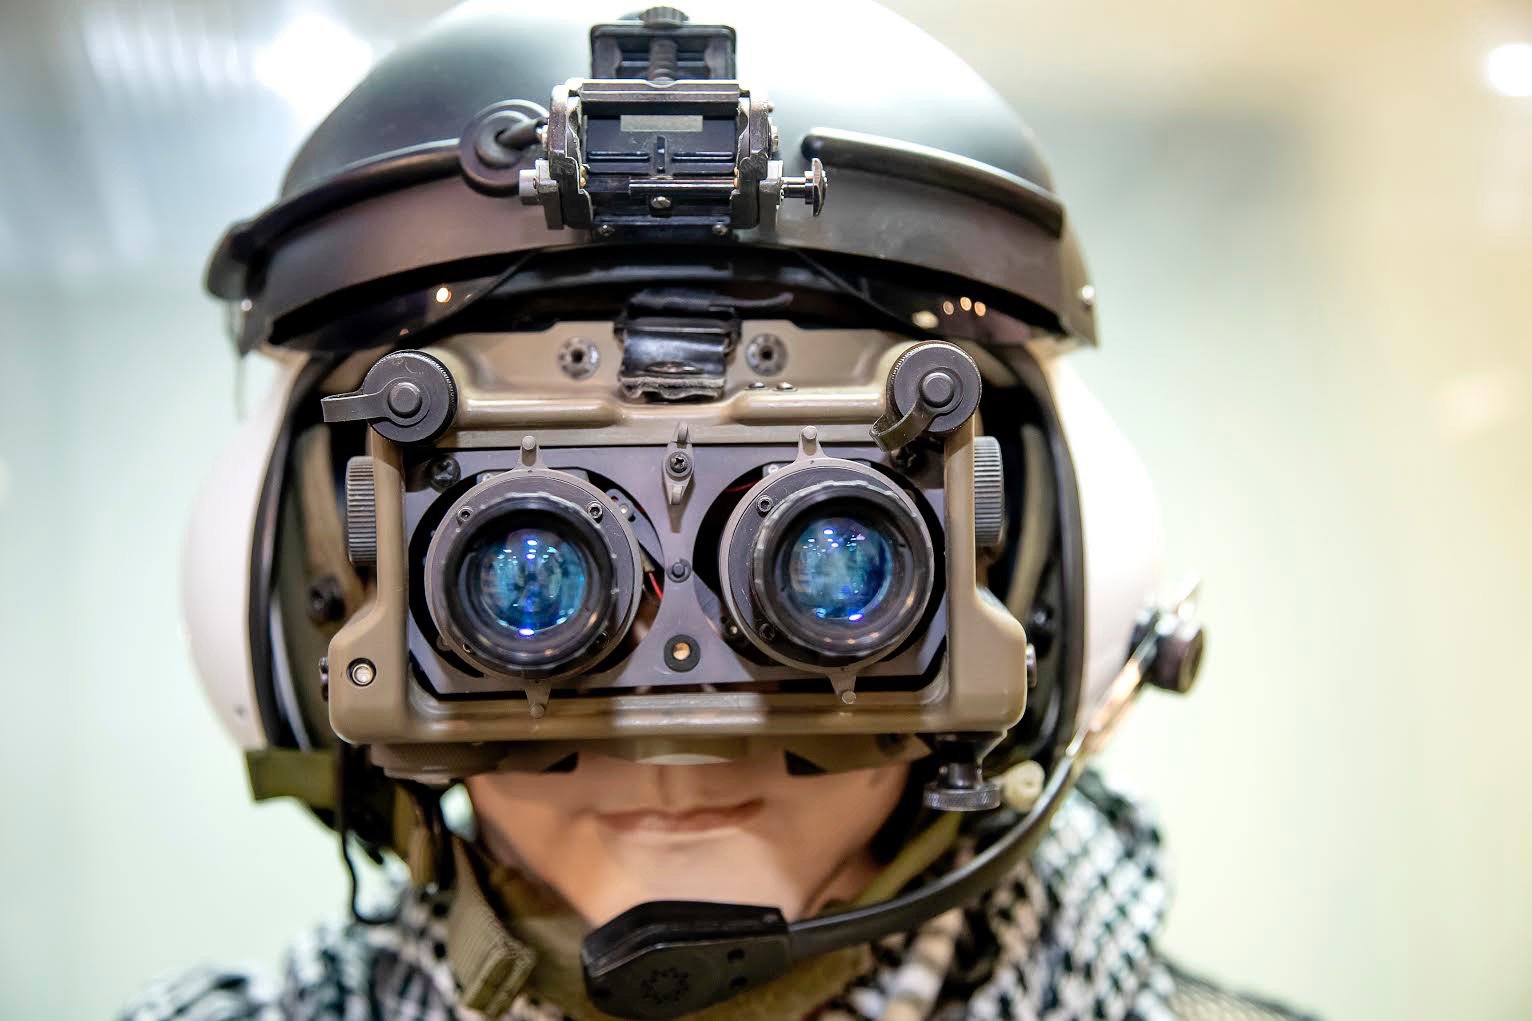 Declassified night vision goggles used by CIA aviators.